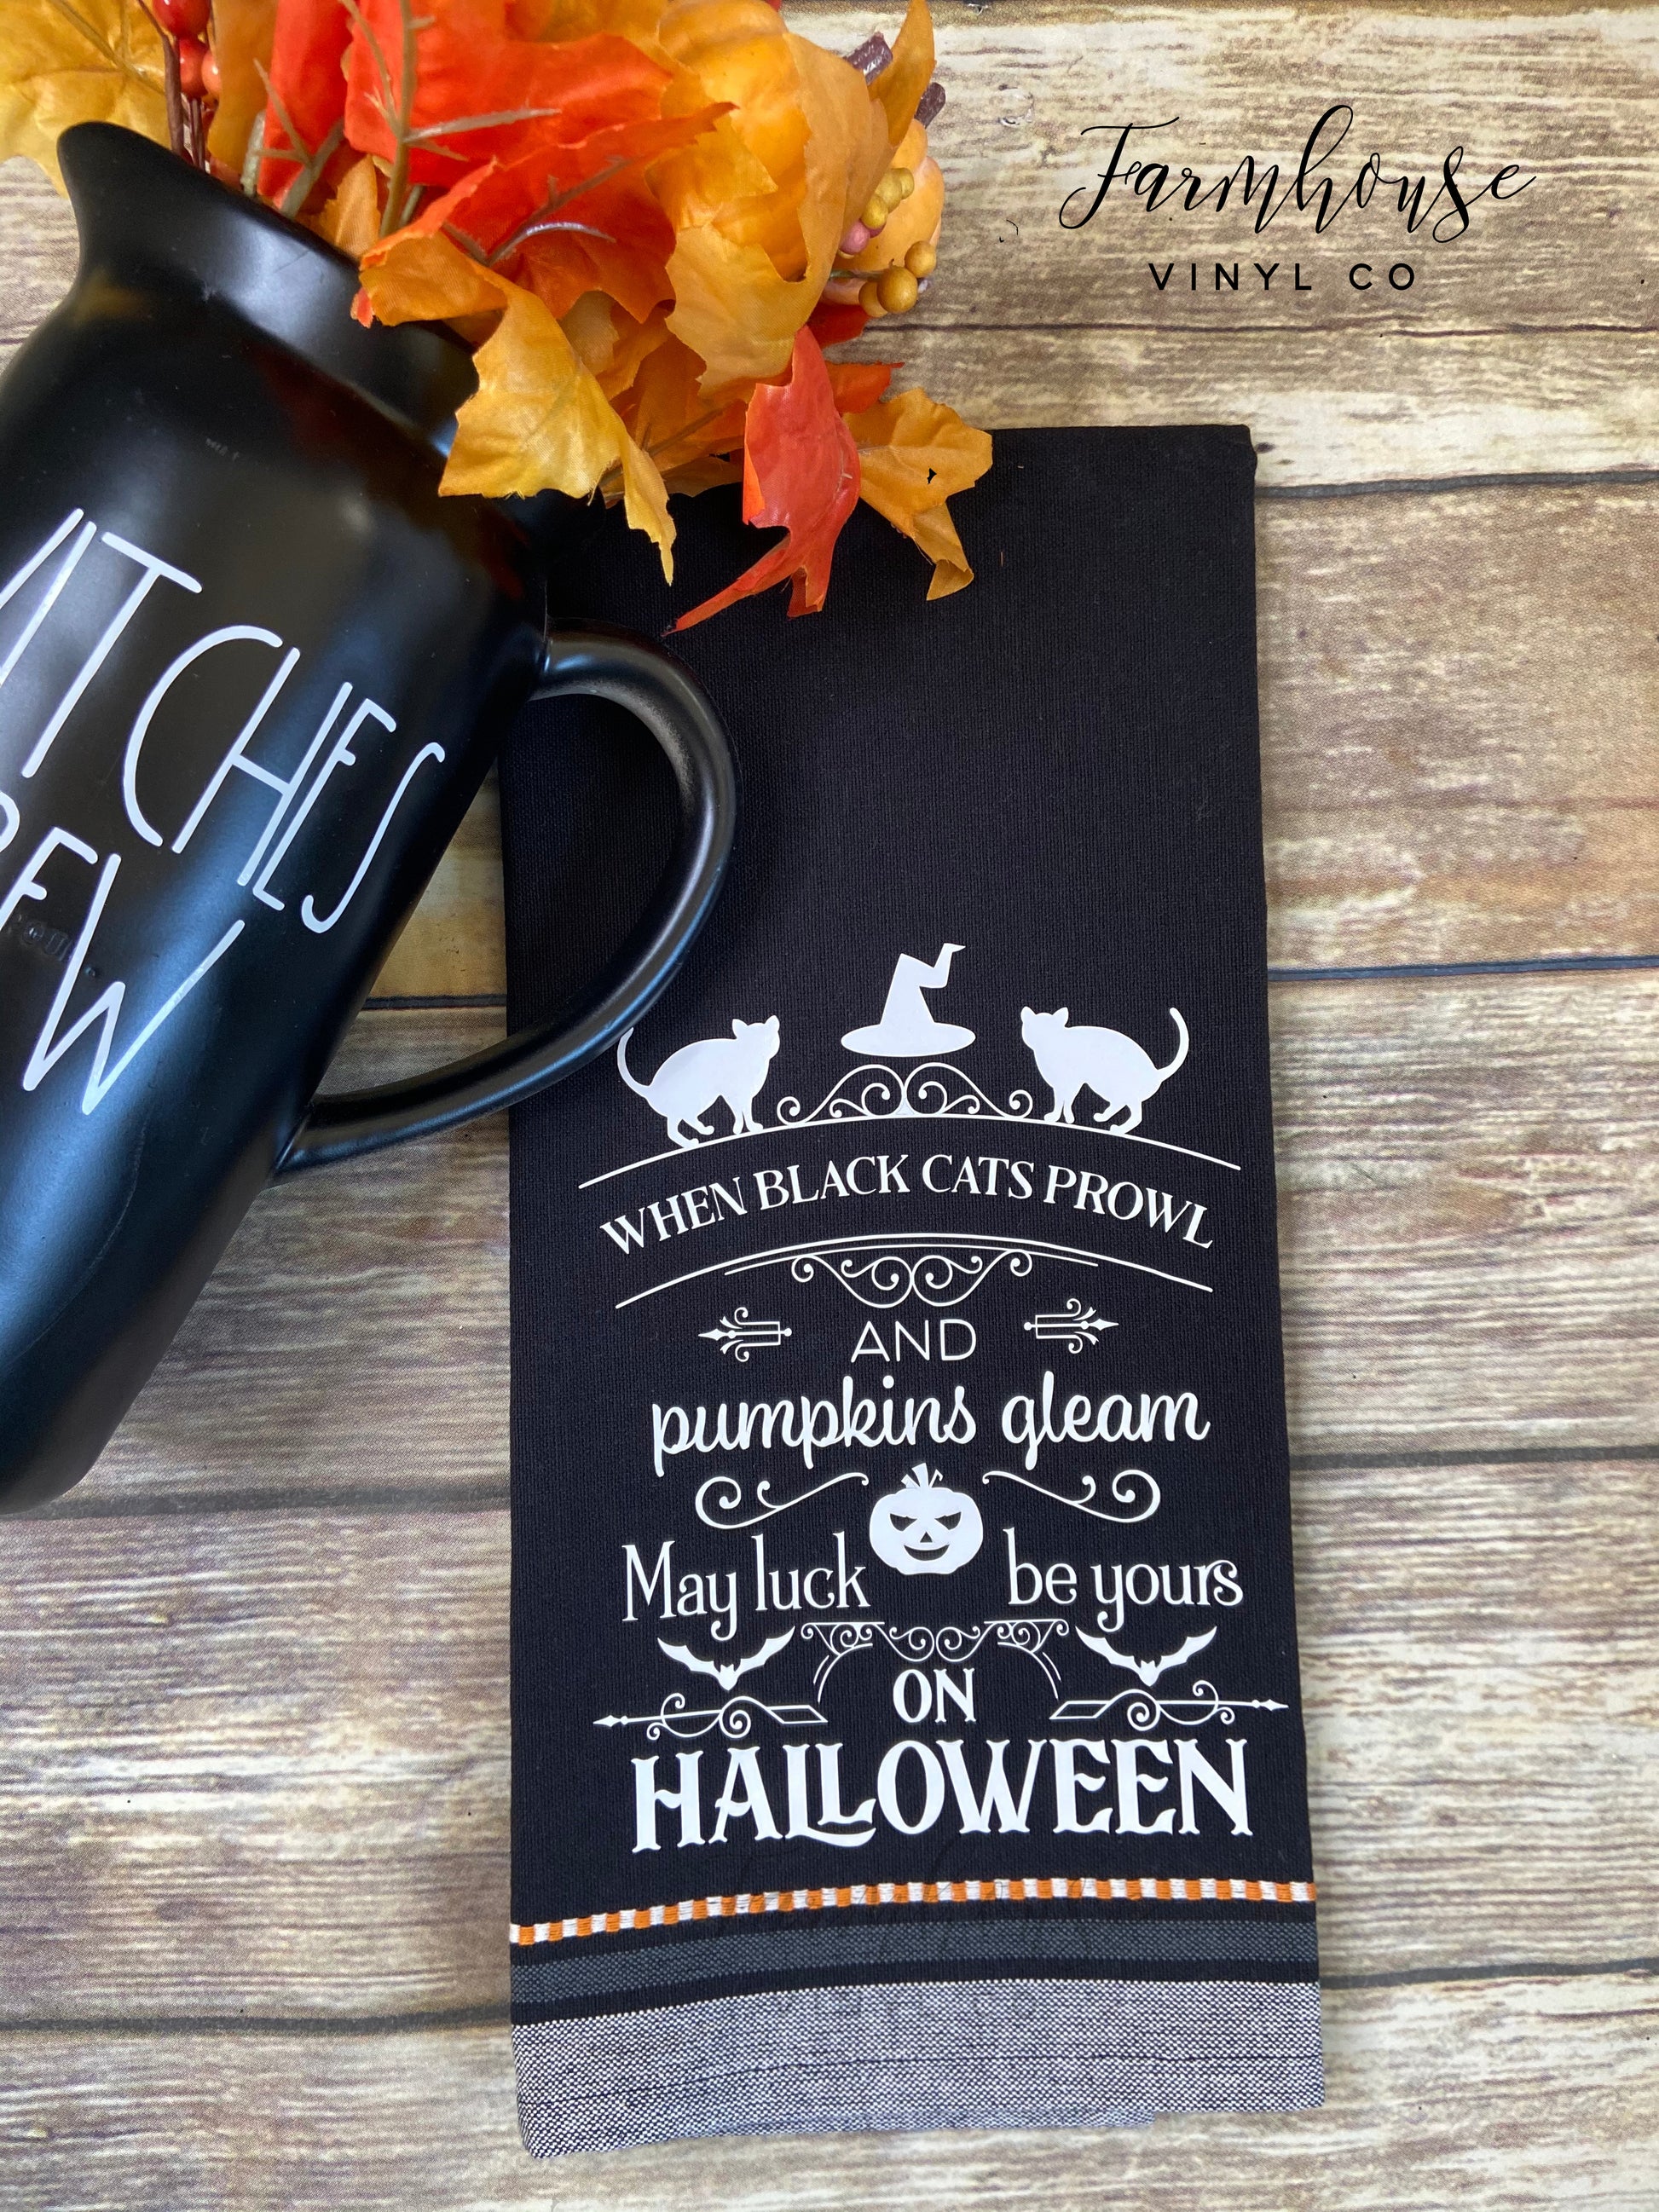 When Black Cats Prowl and Pumpkins Gleam May Luck Be Yours On Halloween Towel - Farmhouse Vinyl Co